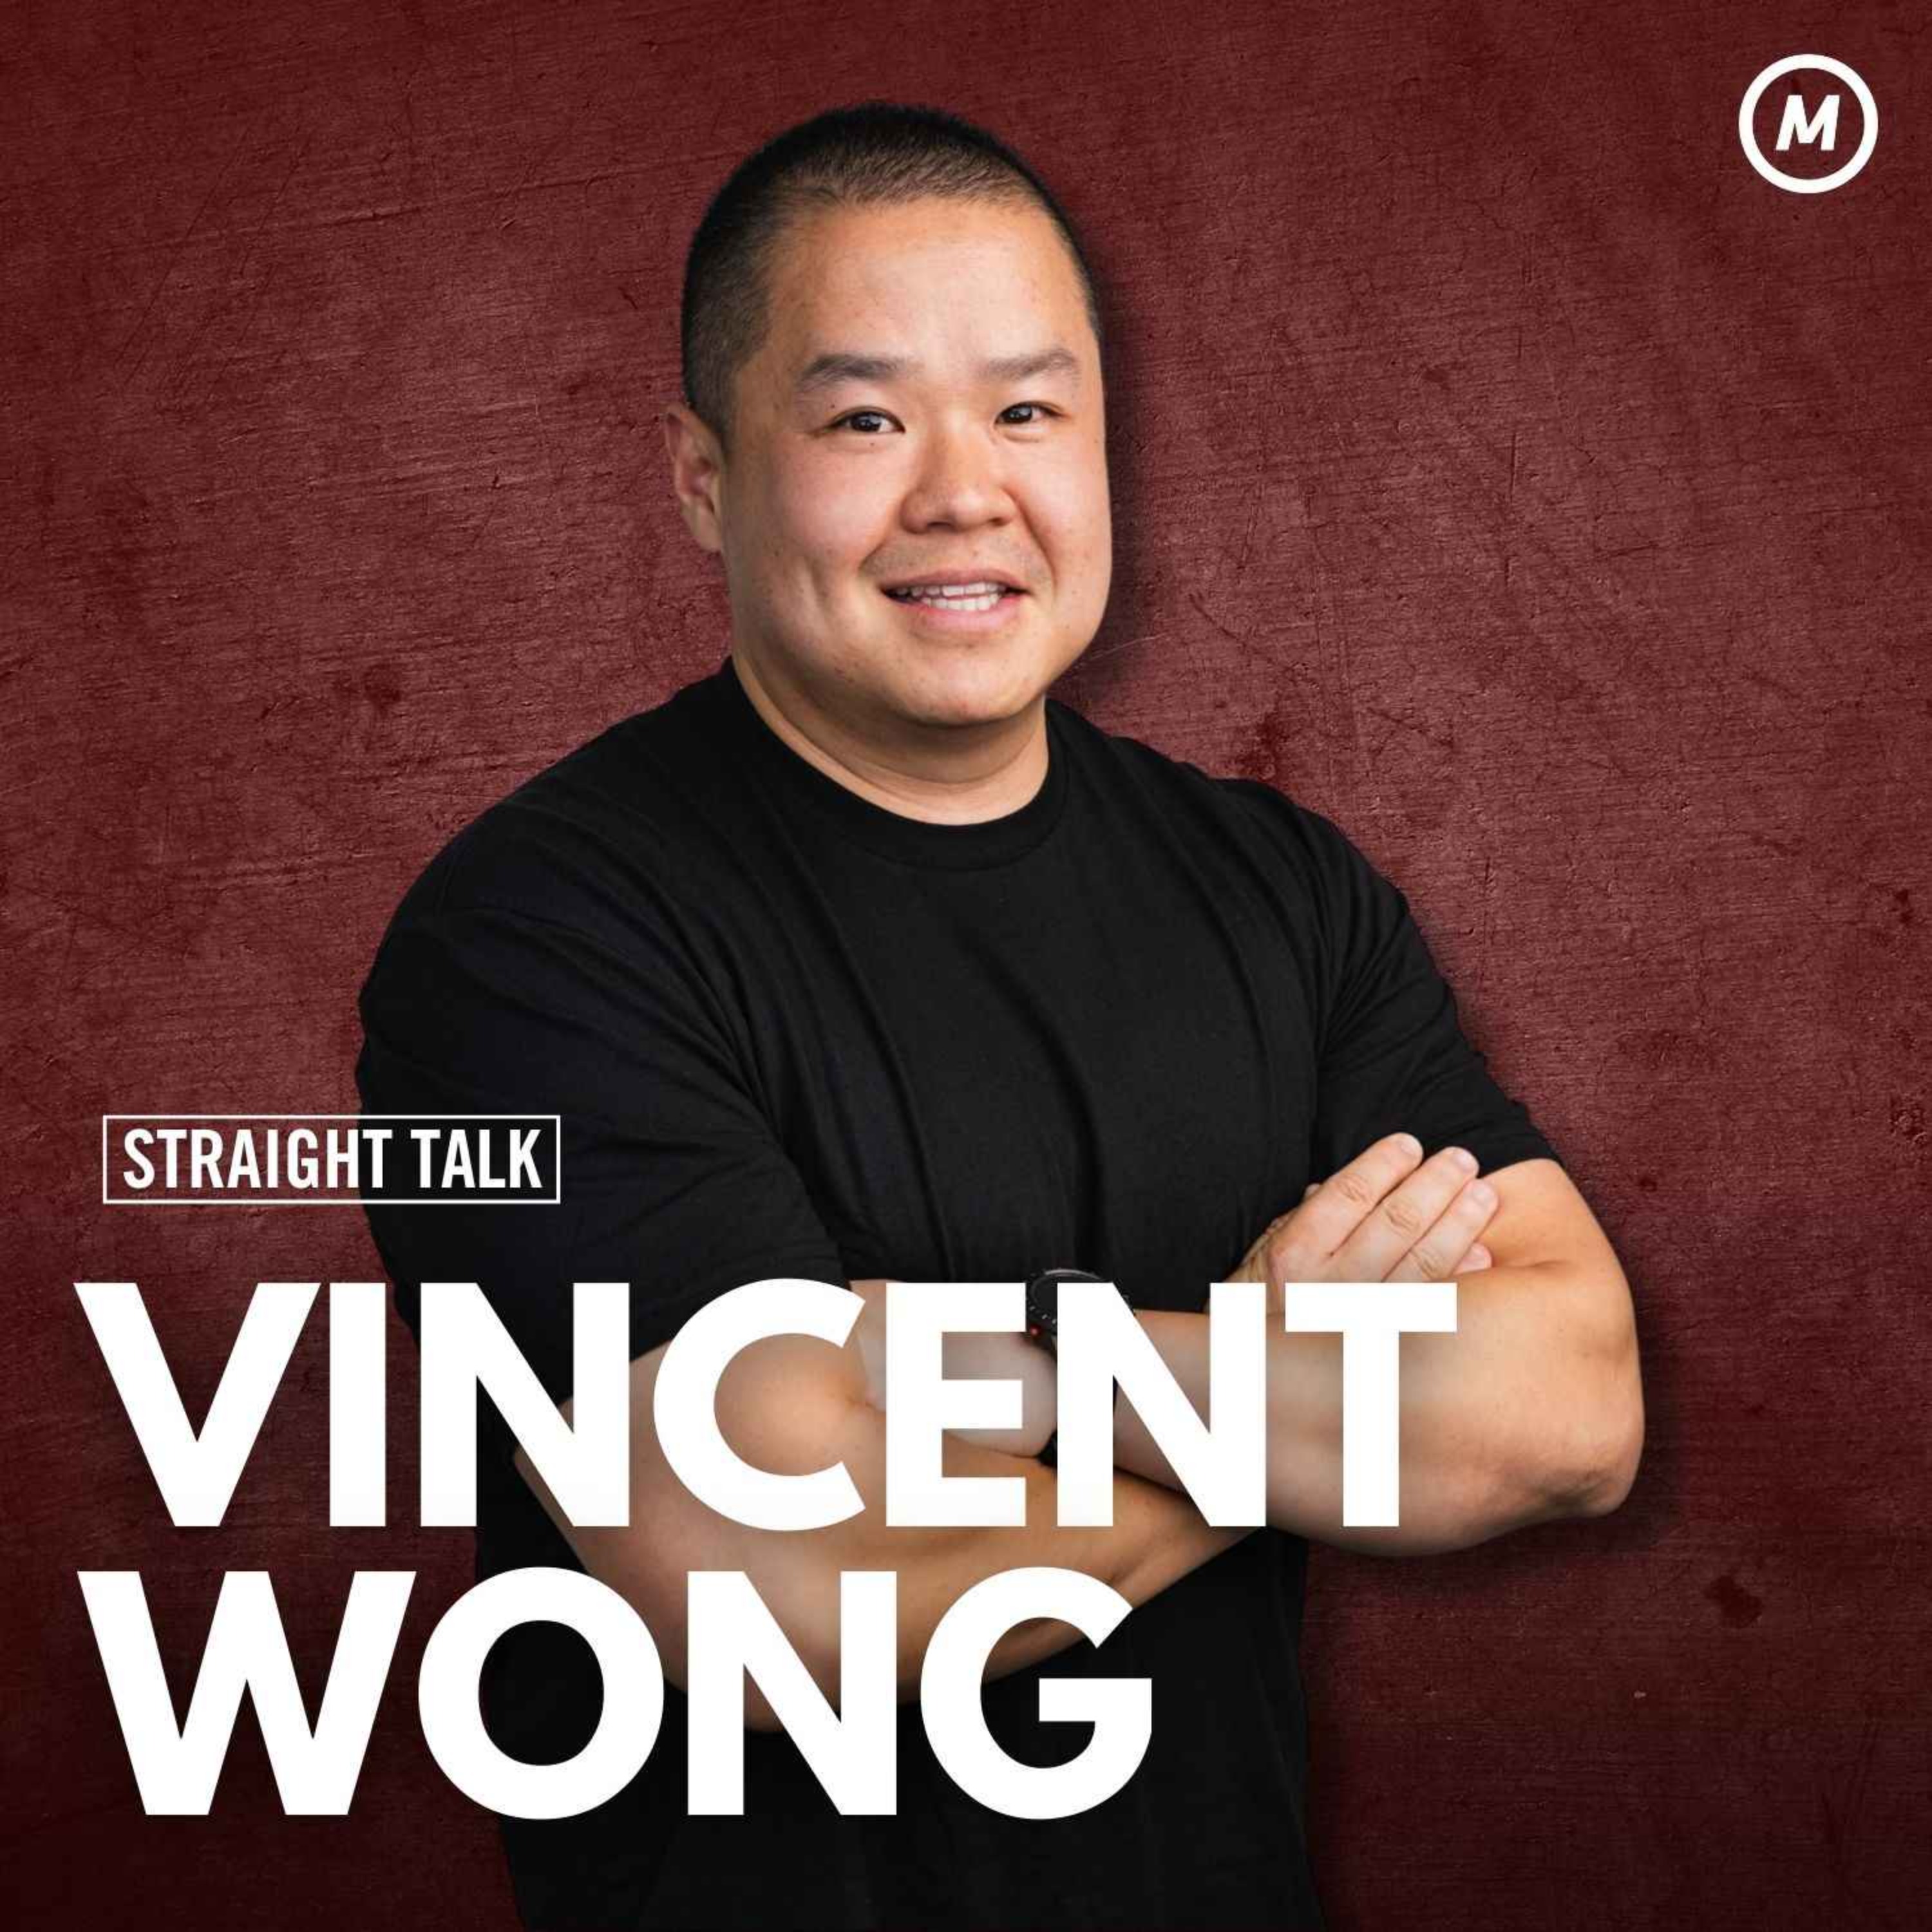 #113 ”You learn more on the way down” Vincent Wong On Navigating Turbulence, Rebuilding, and Inspiring Others